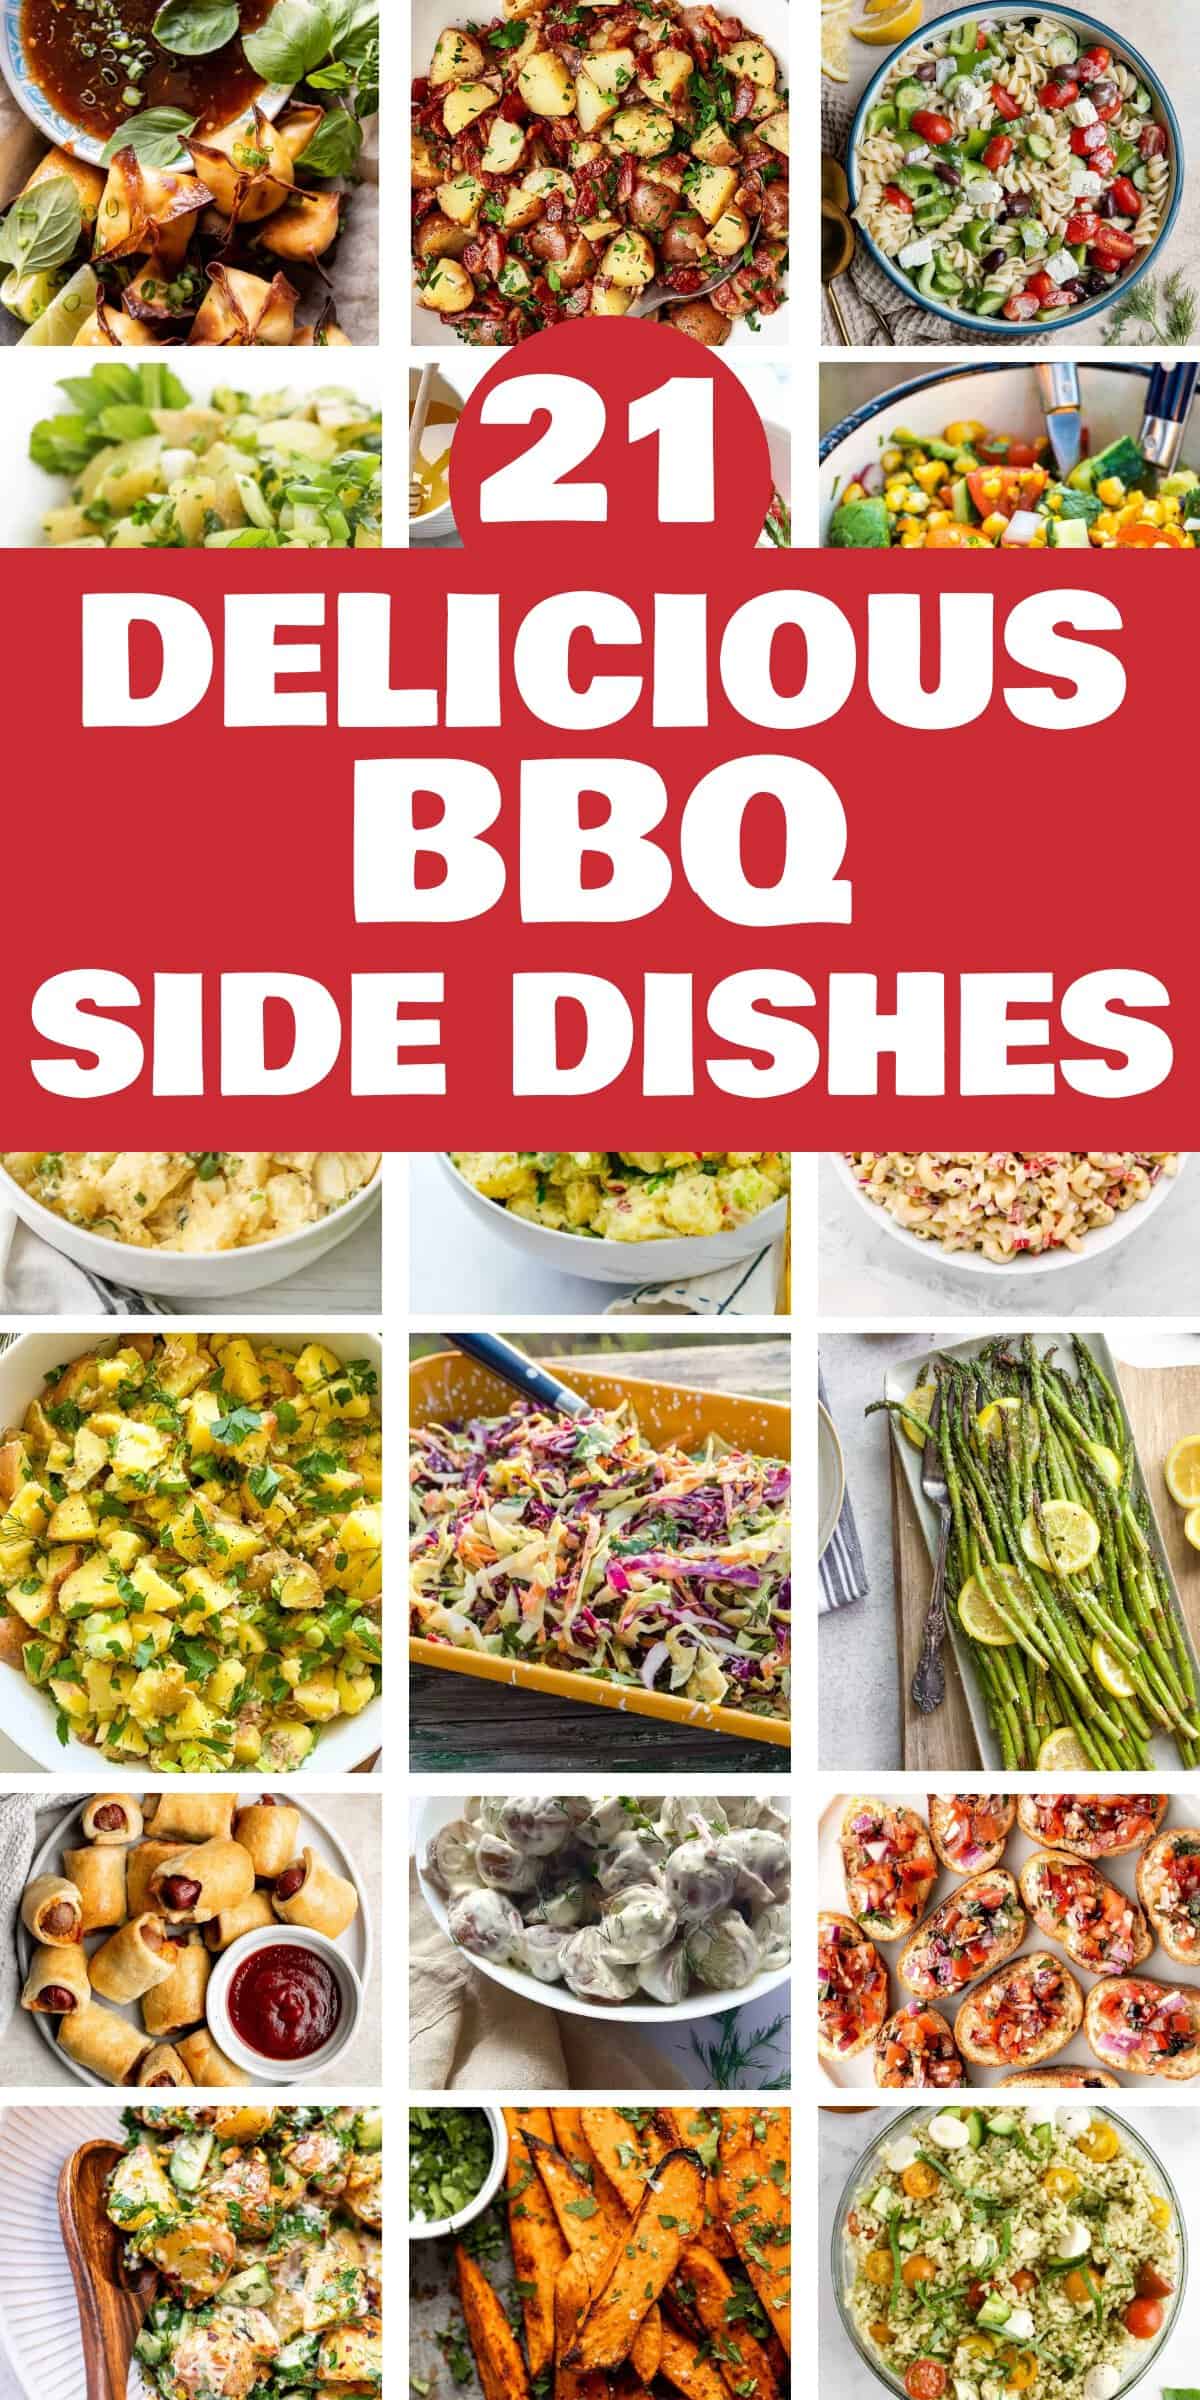 21 Delicious BBQ Side Dishes